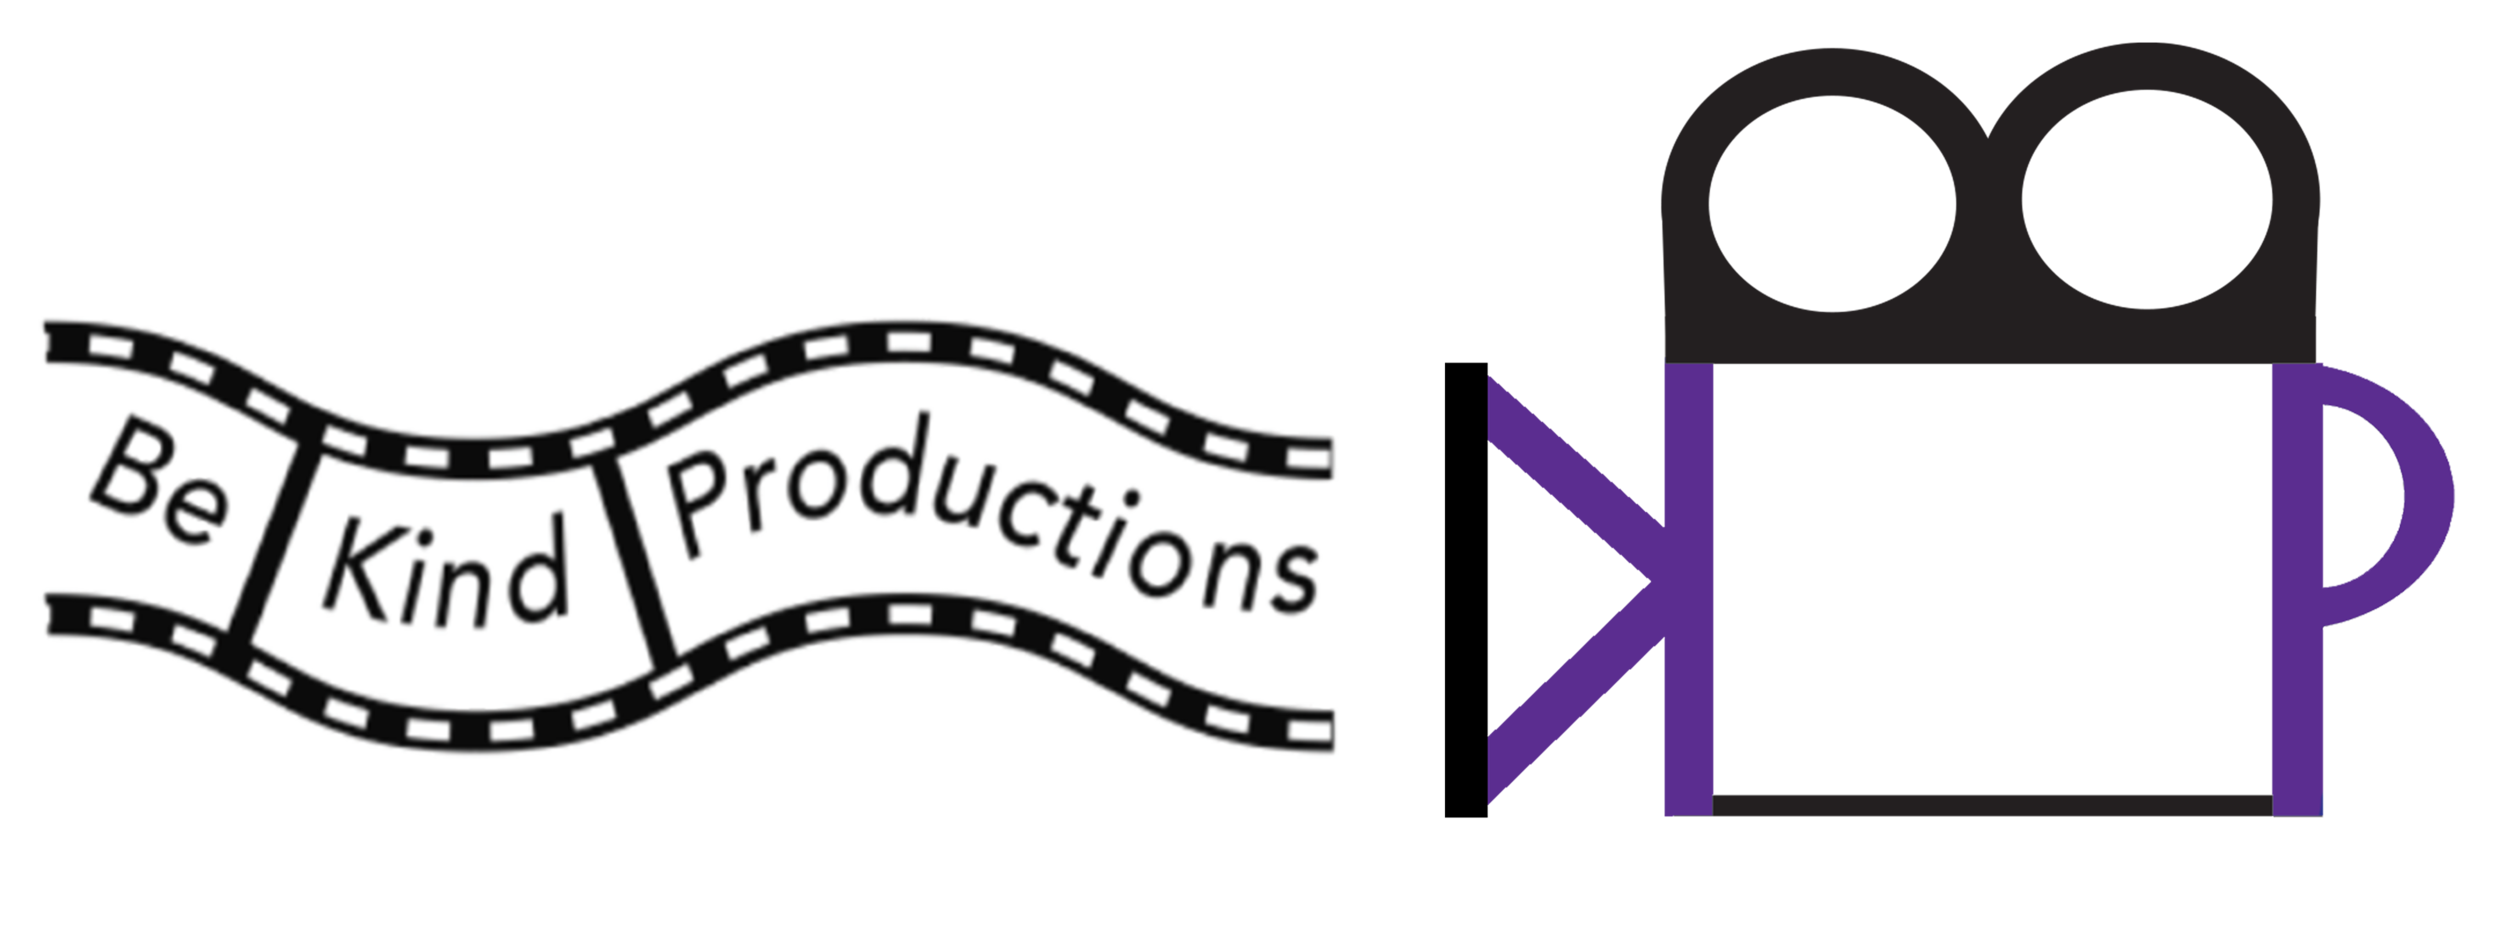 Be Kind Productions